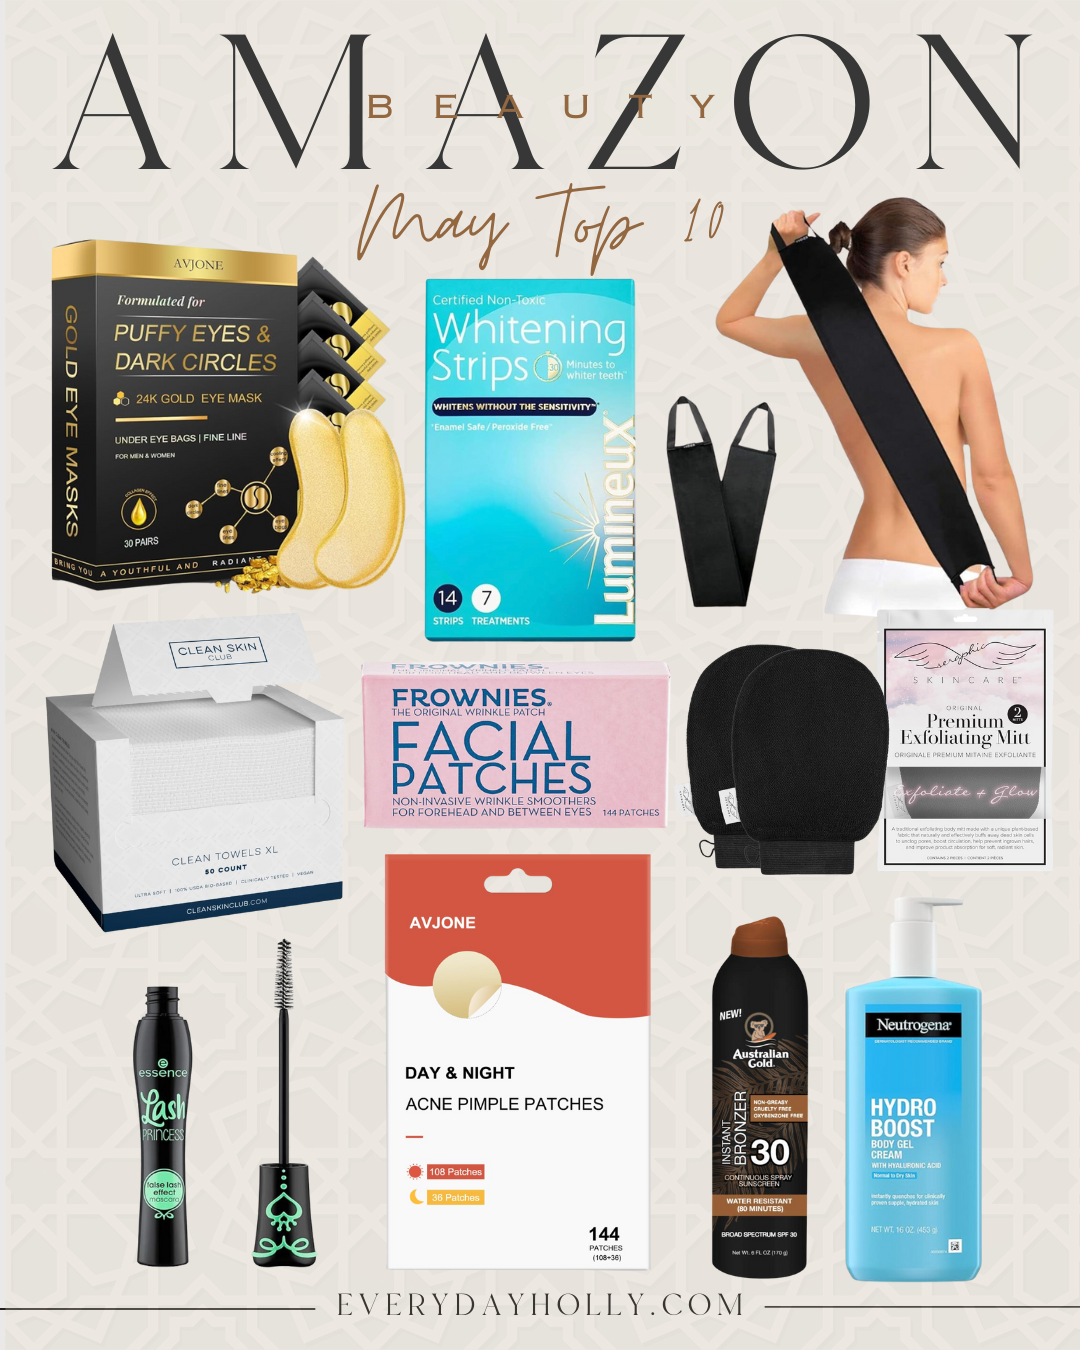 Top 10 hottest best sellers from may | best sellers, monthly top sellers, fashion, home, beauty, everyday fashion Amazon, skin care, self care, self-tanning, beauty routine, eye mask, sunscreen, summer skincare